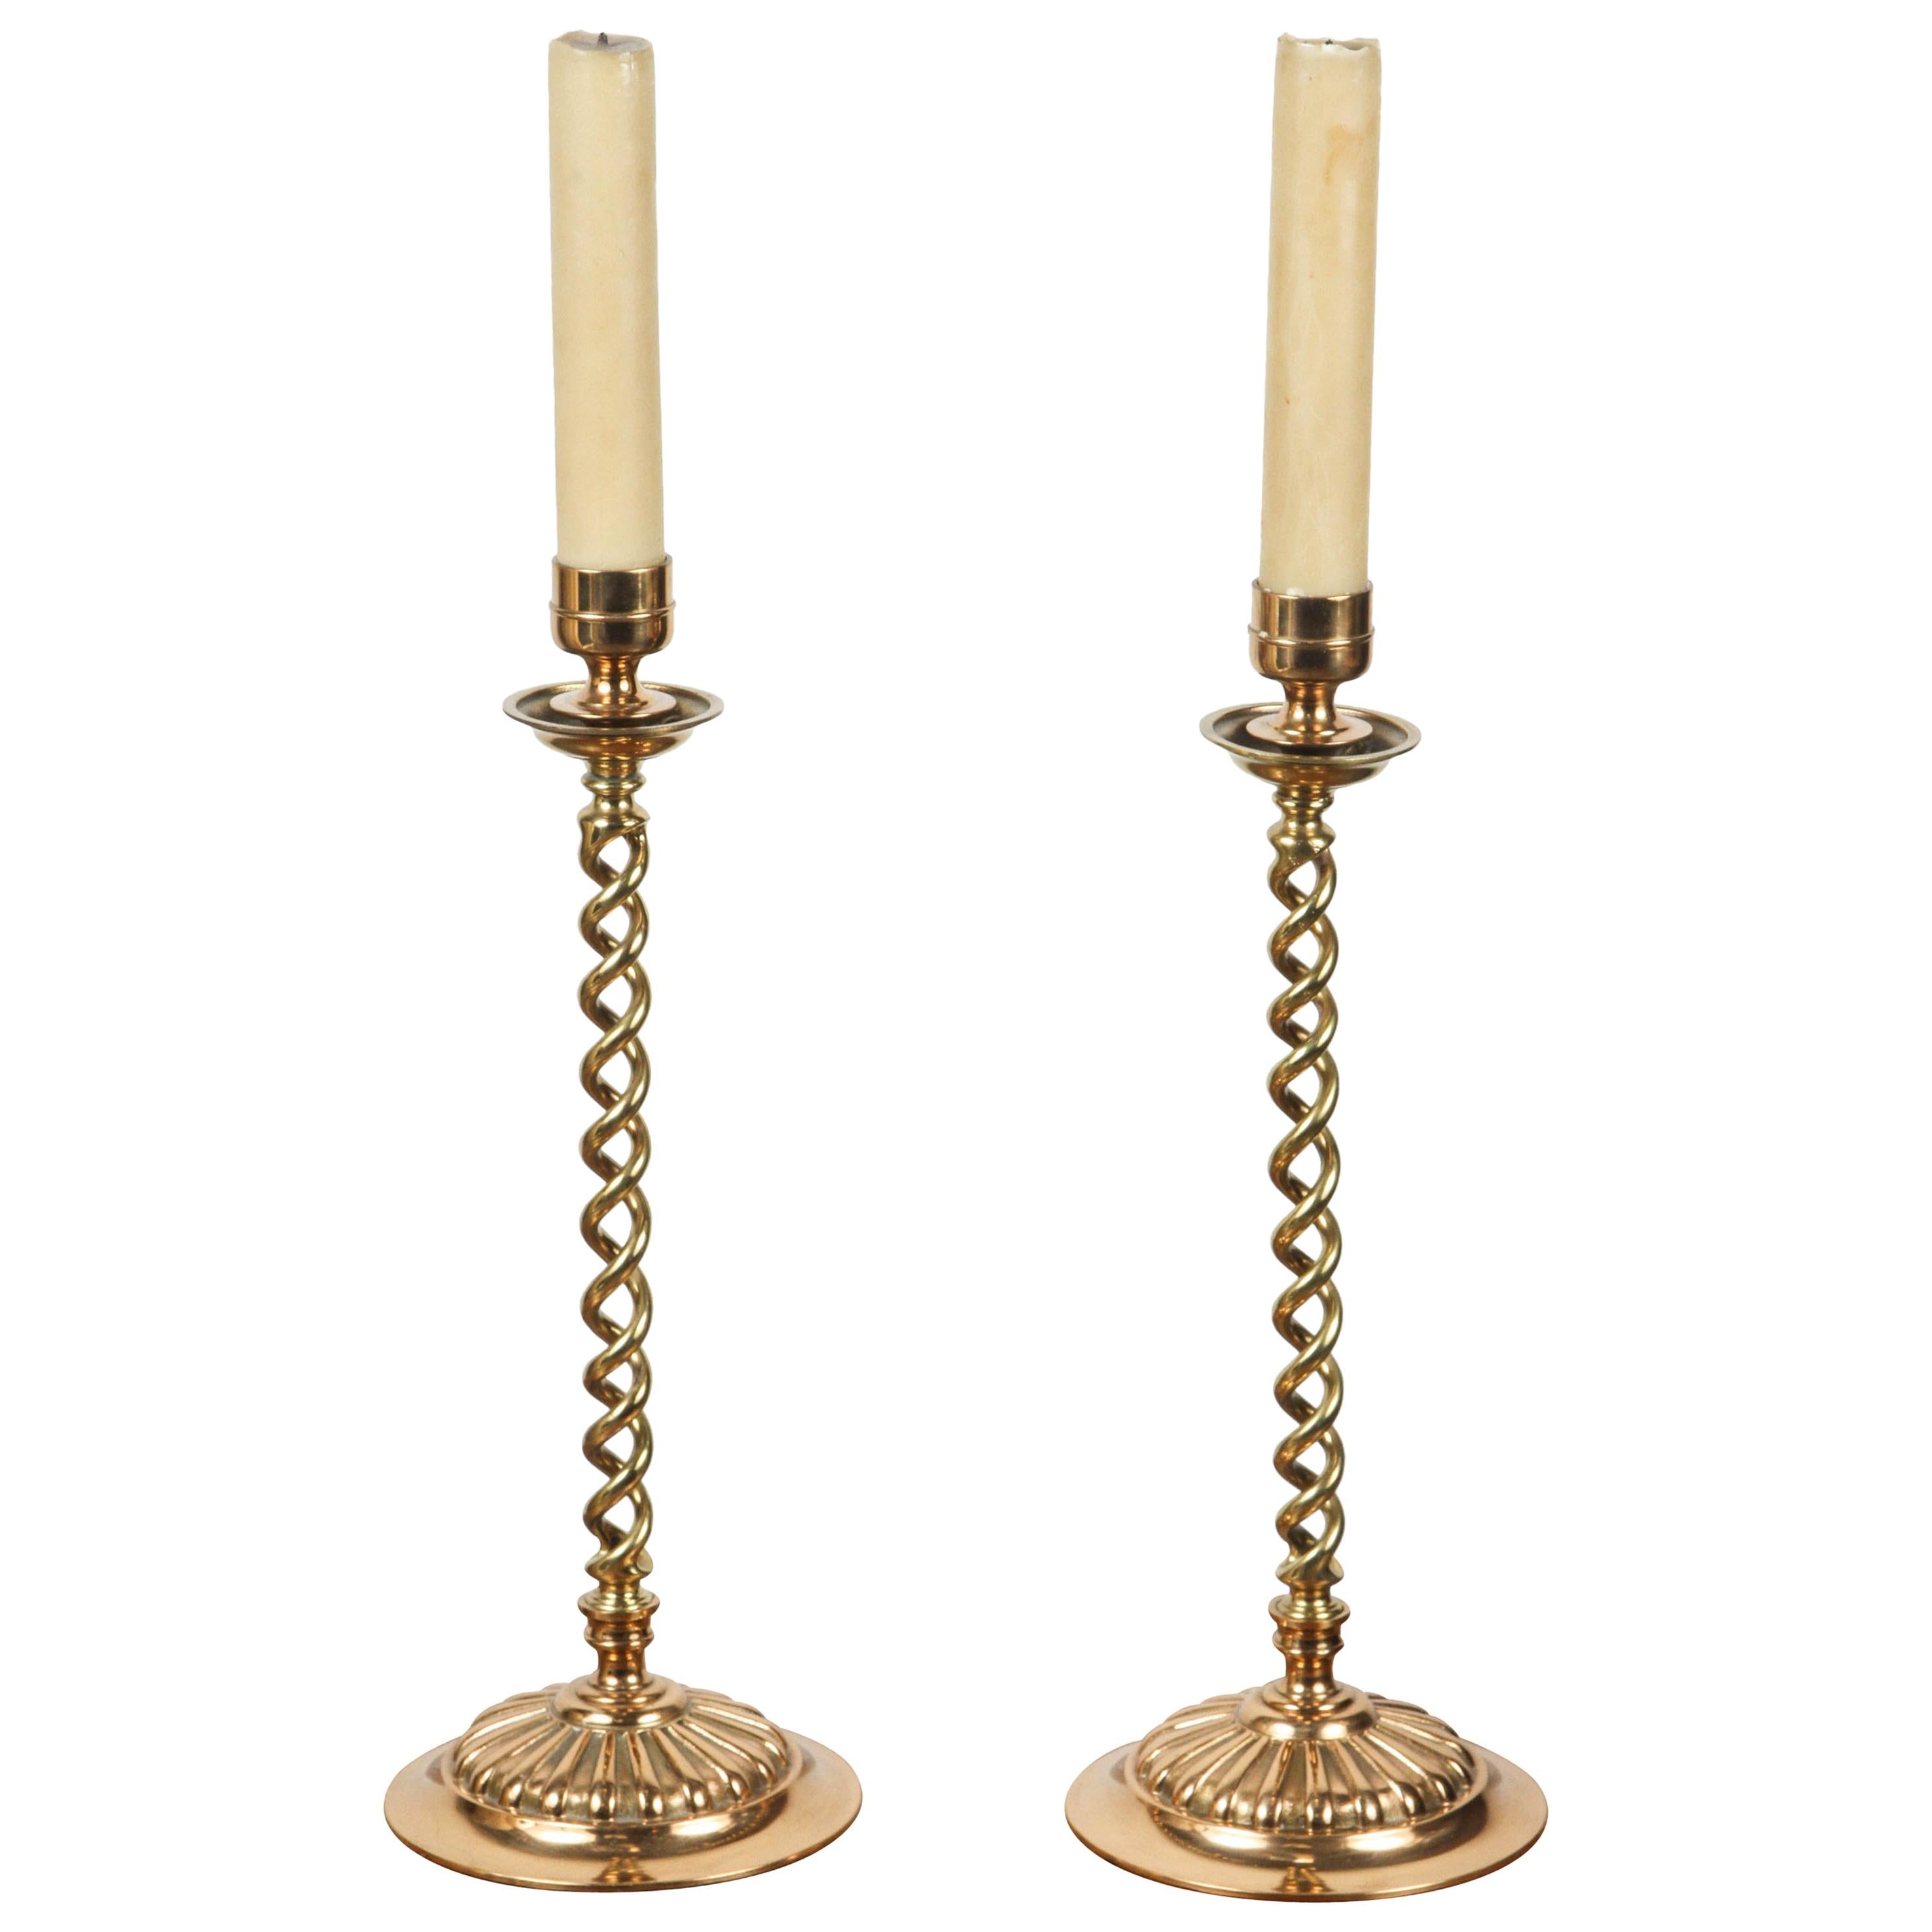 Antique Victorian Polished Brass Candle Stands